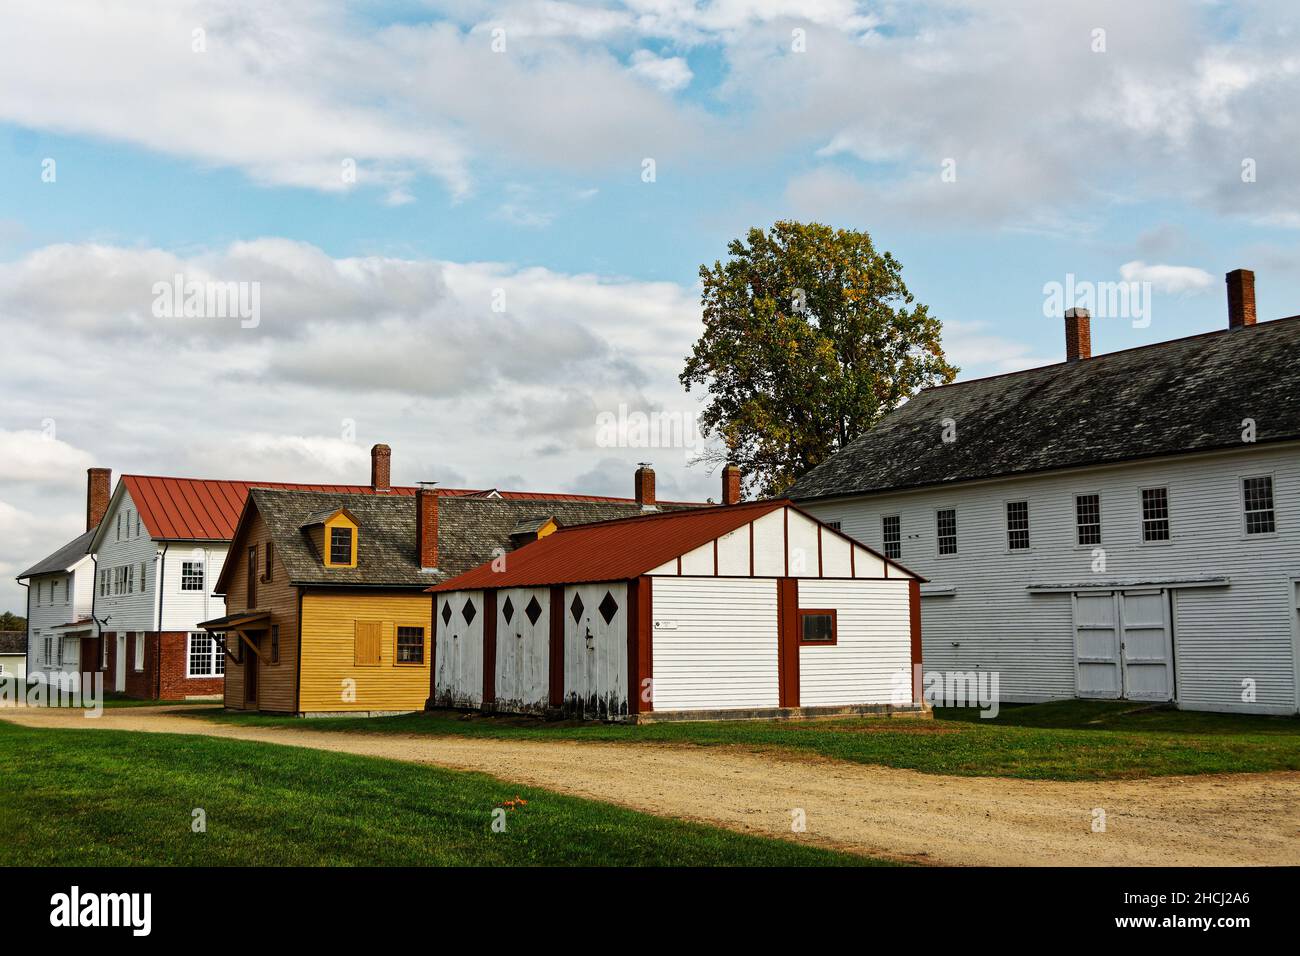 The syrup house and garage sit at the top of the hill on an overcast fall day. Canterbury Shaker Village, New Hampshire USA. Stock Photo